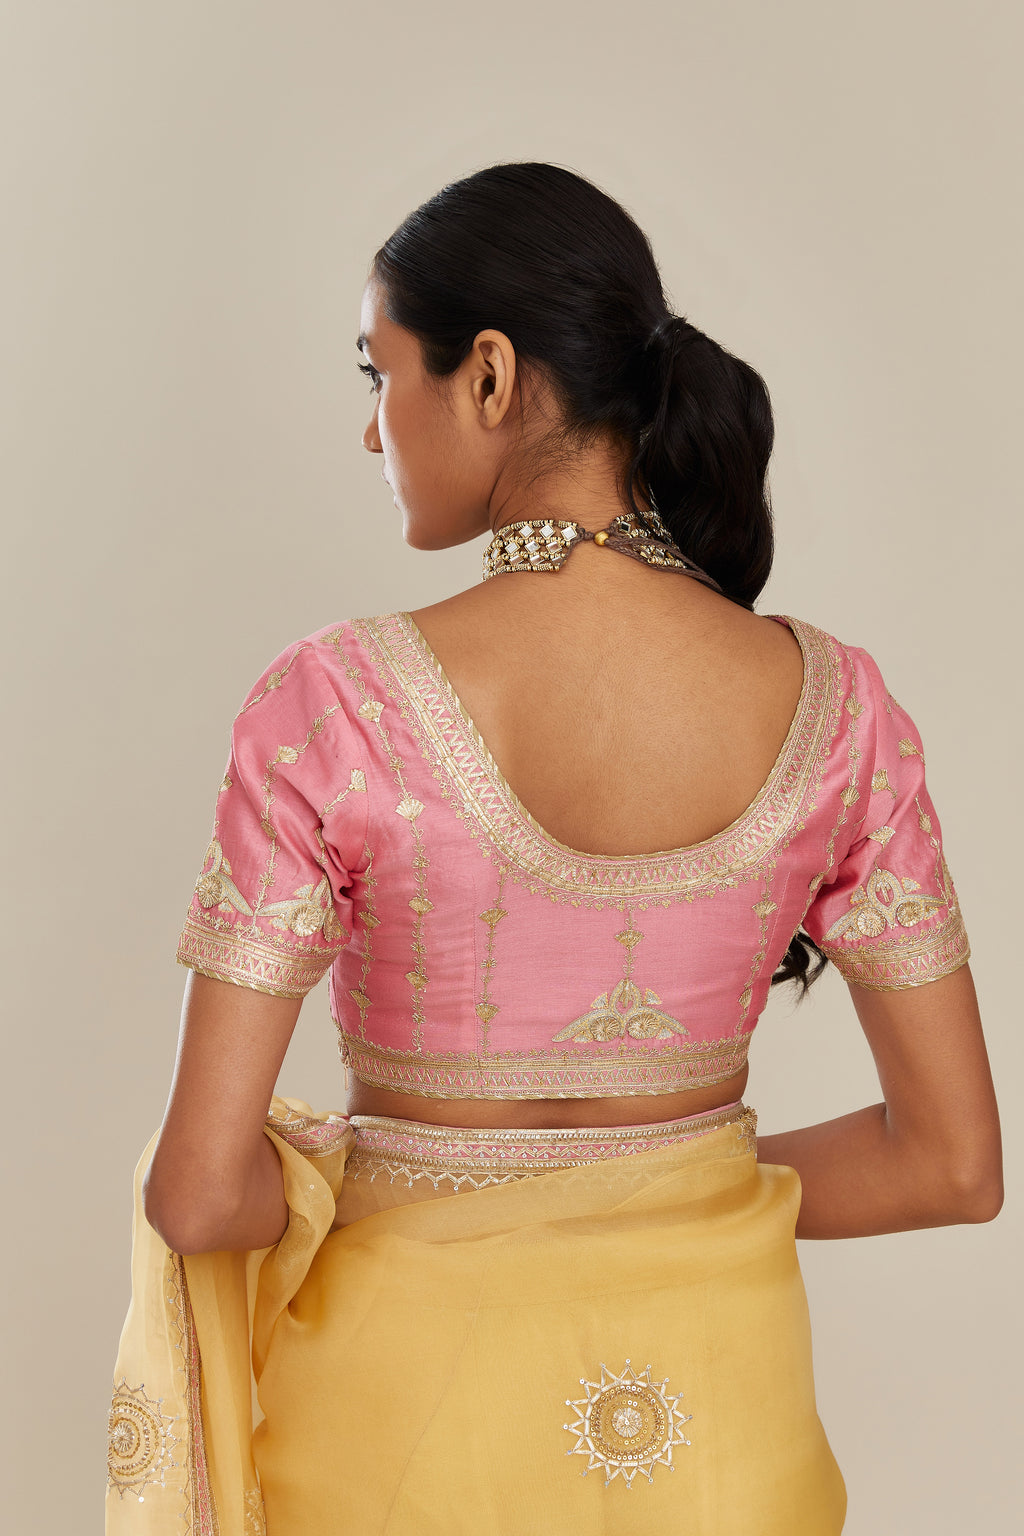 Yellow silk organza saree with delicate gold gota embroidery and contrast colored border running along all edges.